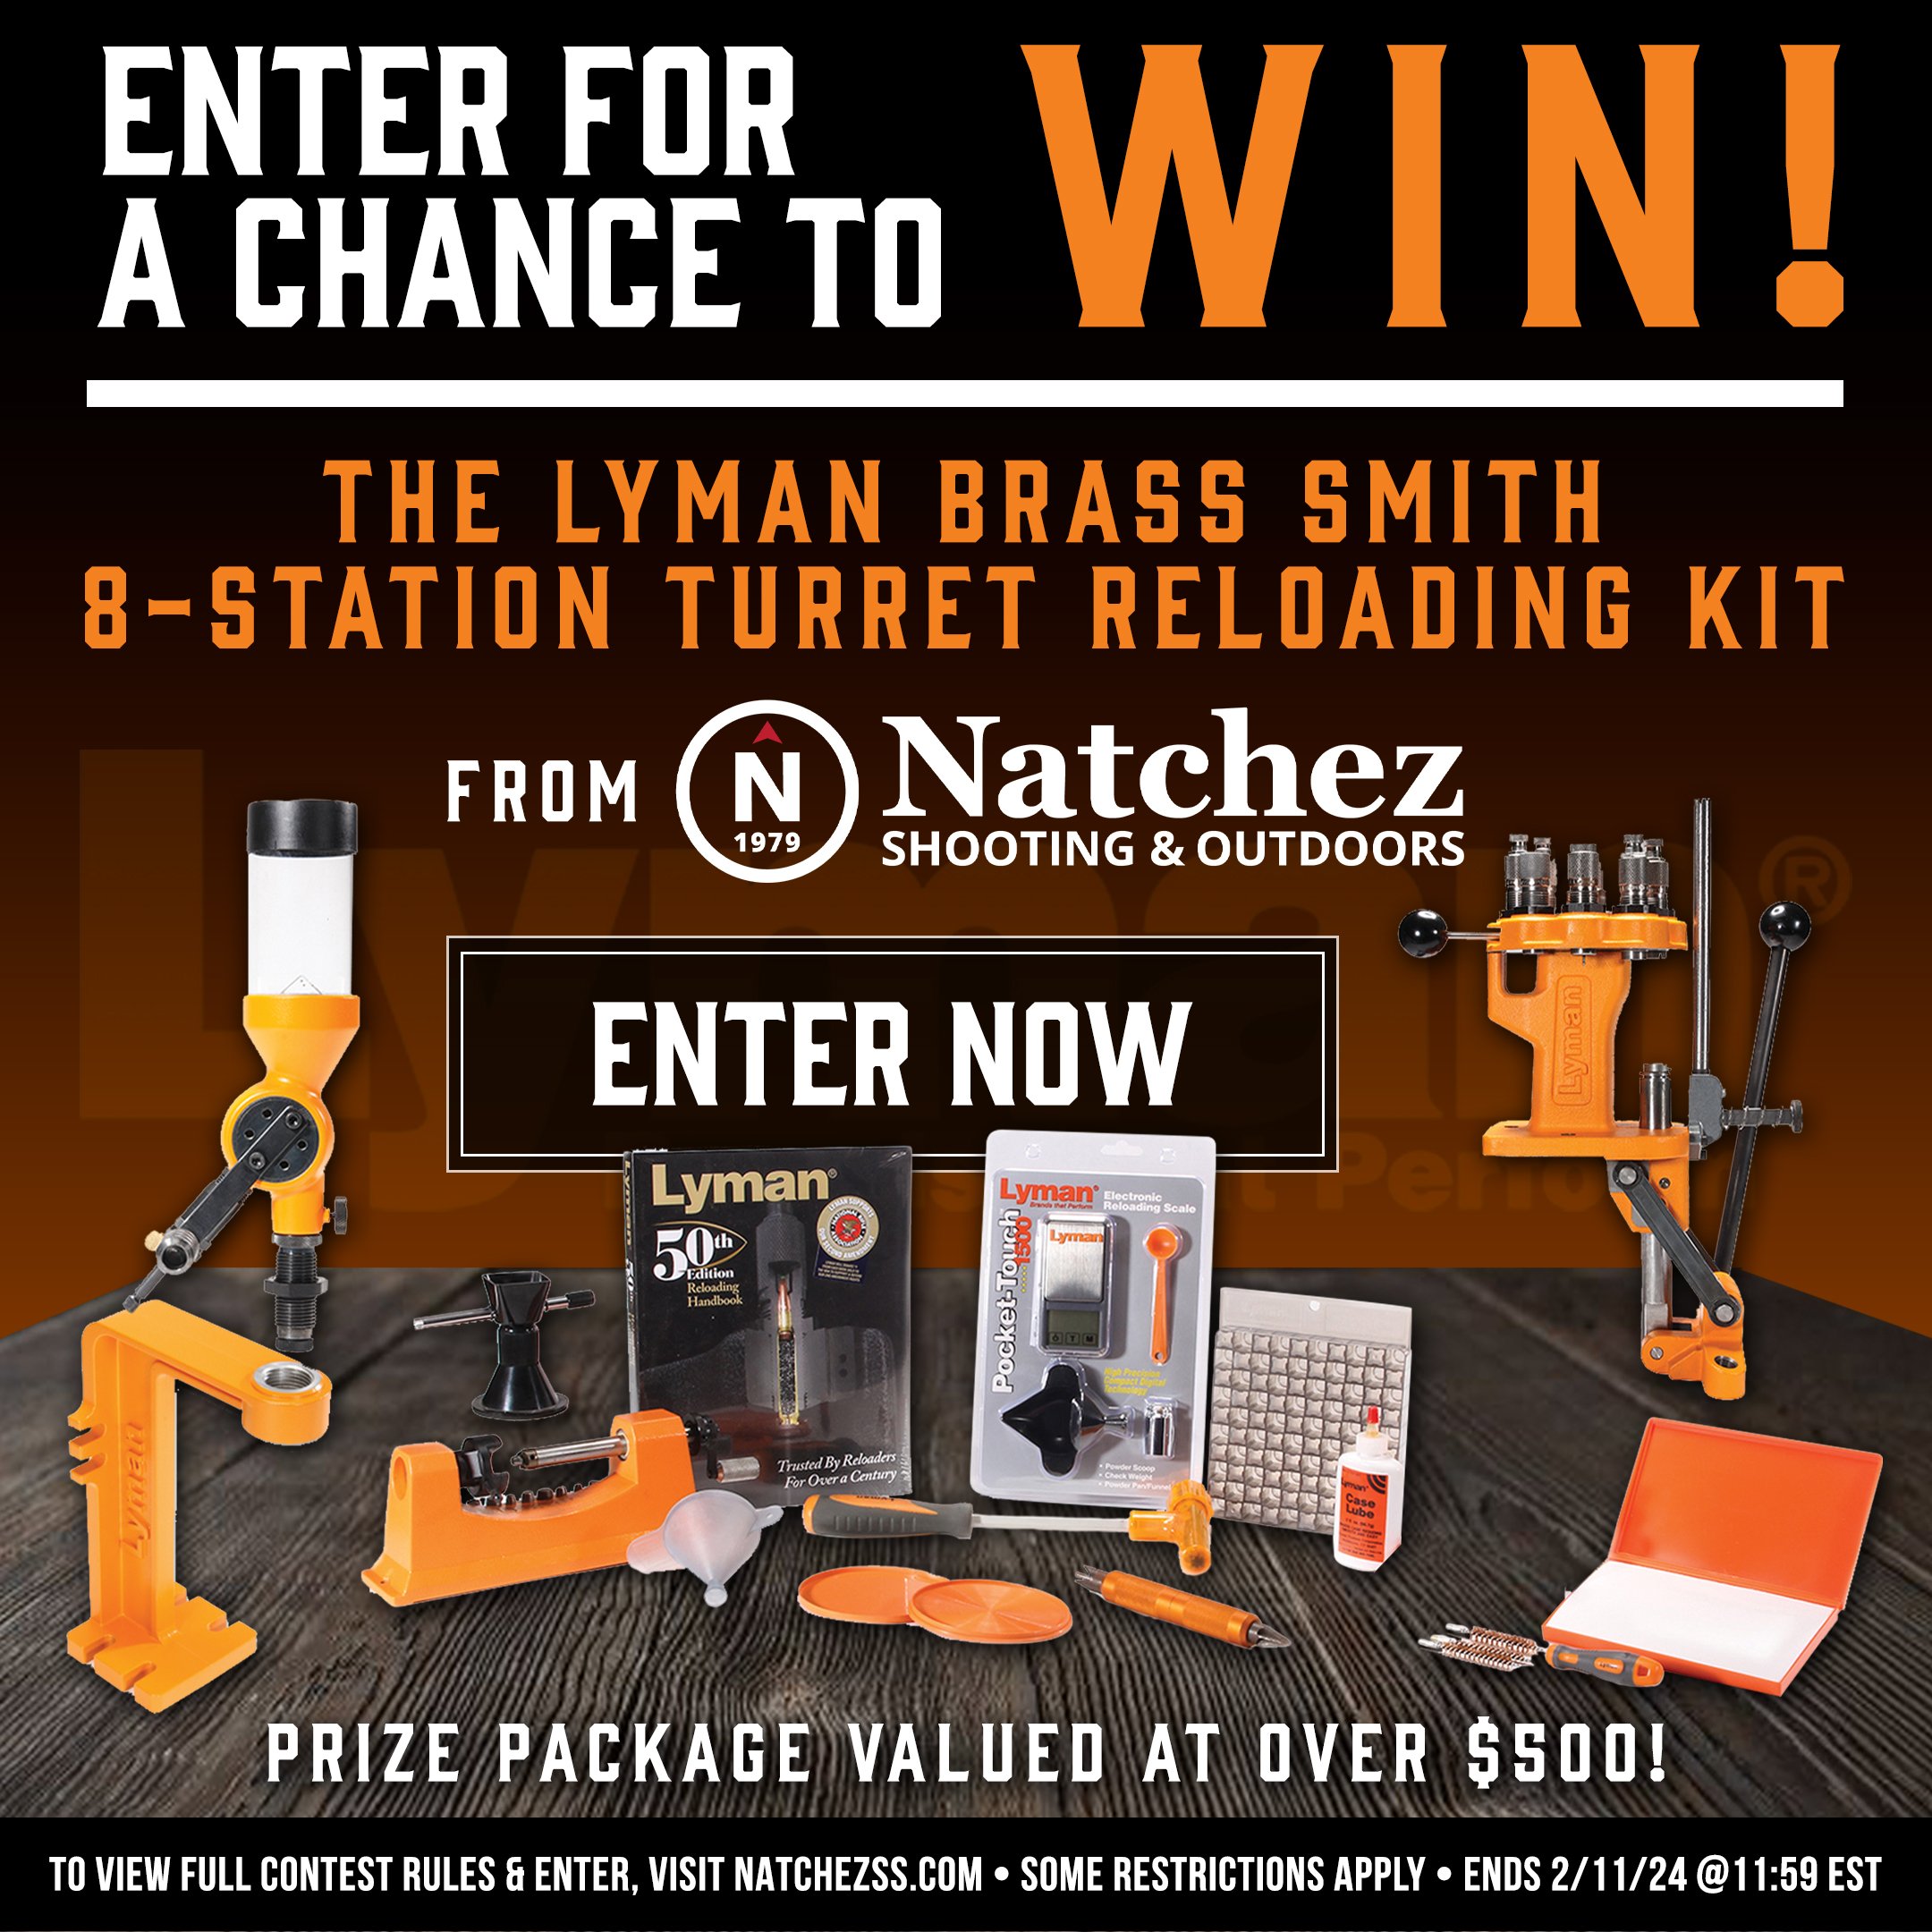 Enter to Win with Natchez!